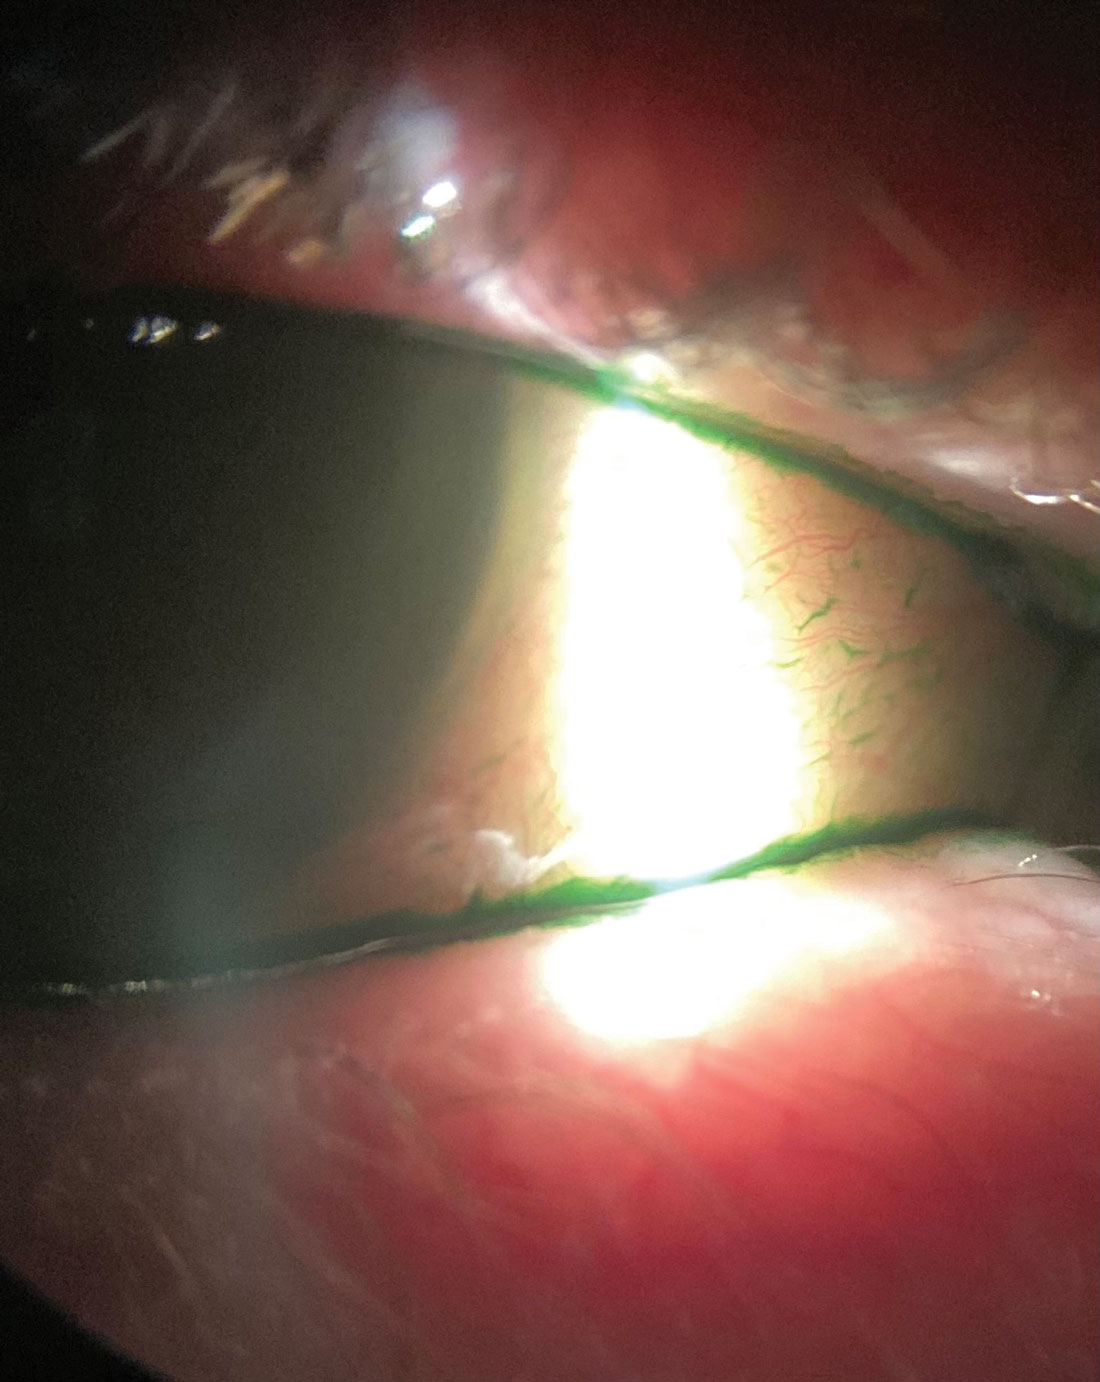 Lissamine green vital dye, shown here in a dry eye patient with inflammation, helps visualize devitalized cells on the conjunctiva.